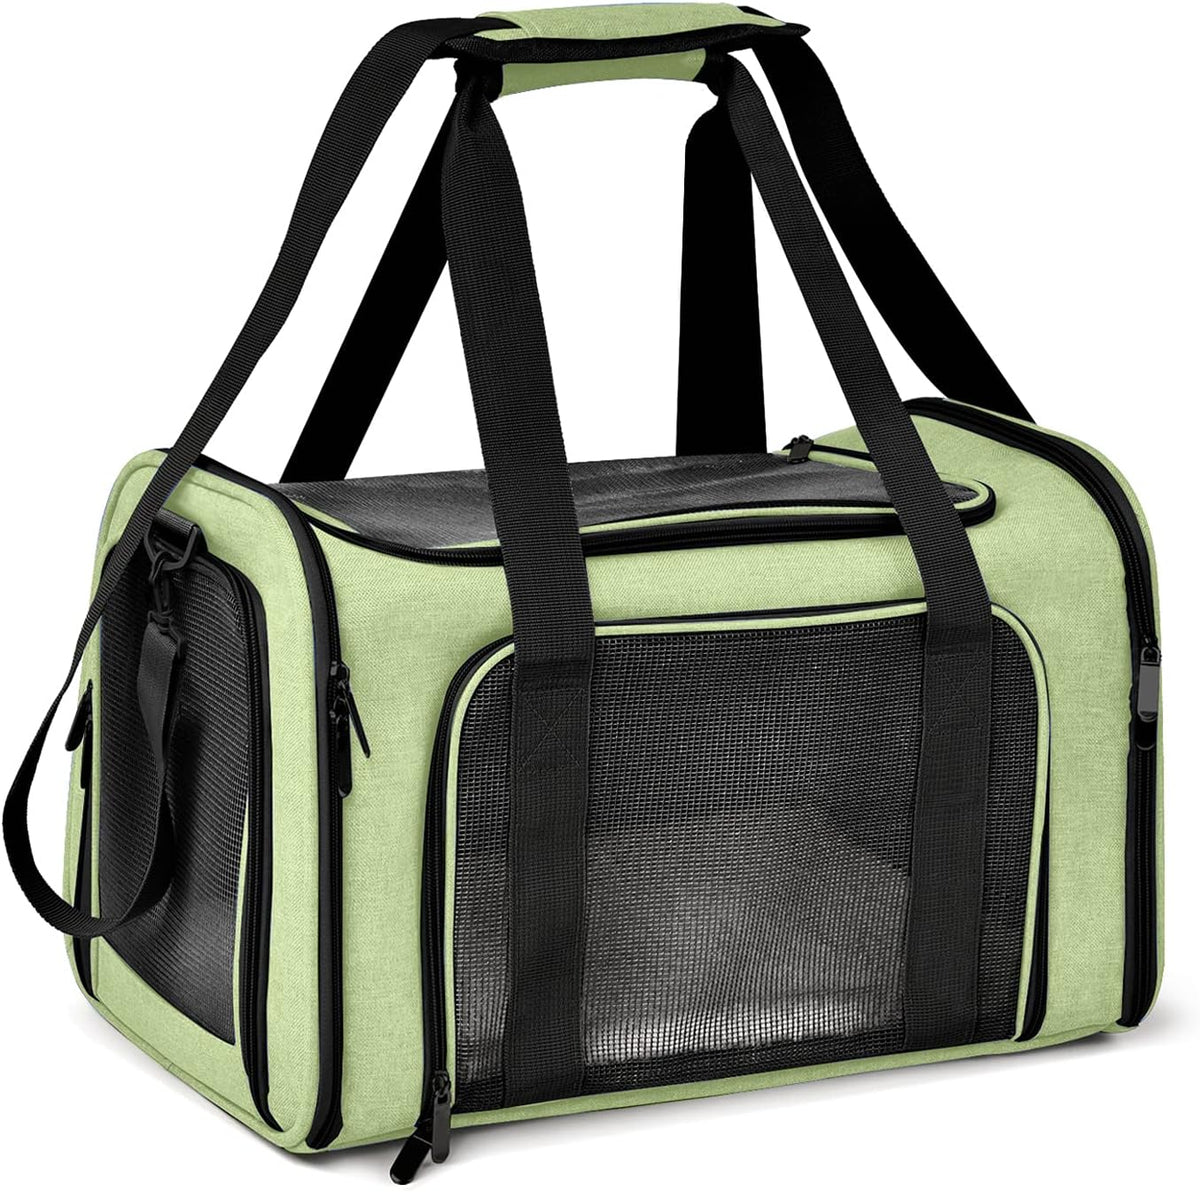 Carriers Soft-sided Pet Carrier for Cats Approved Small Dog 